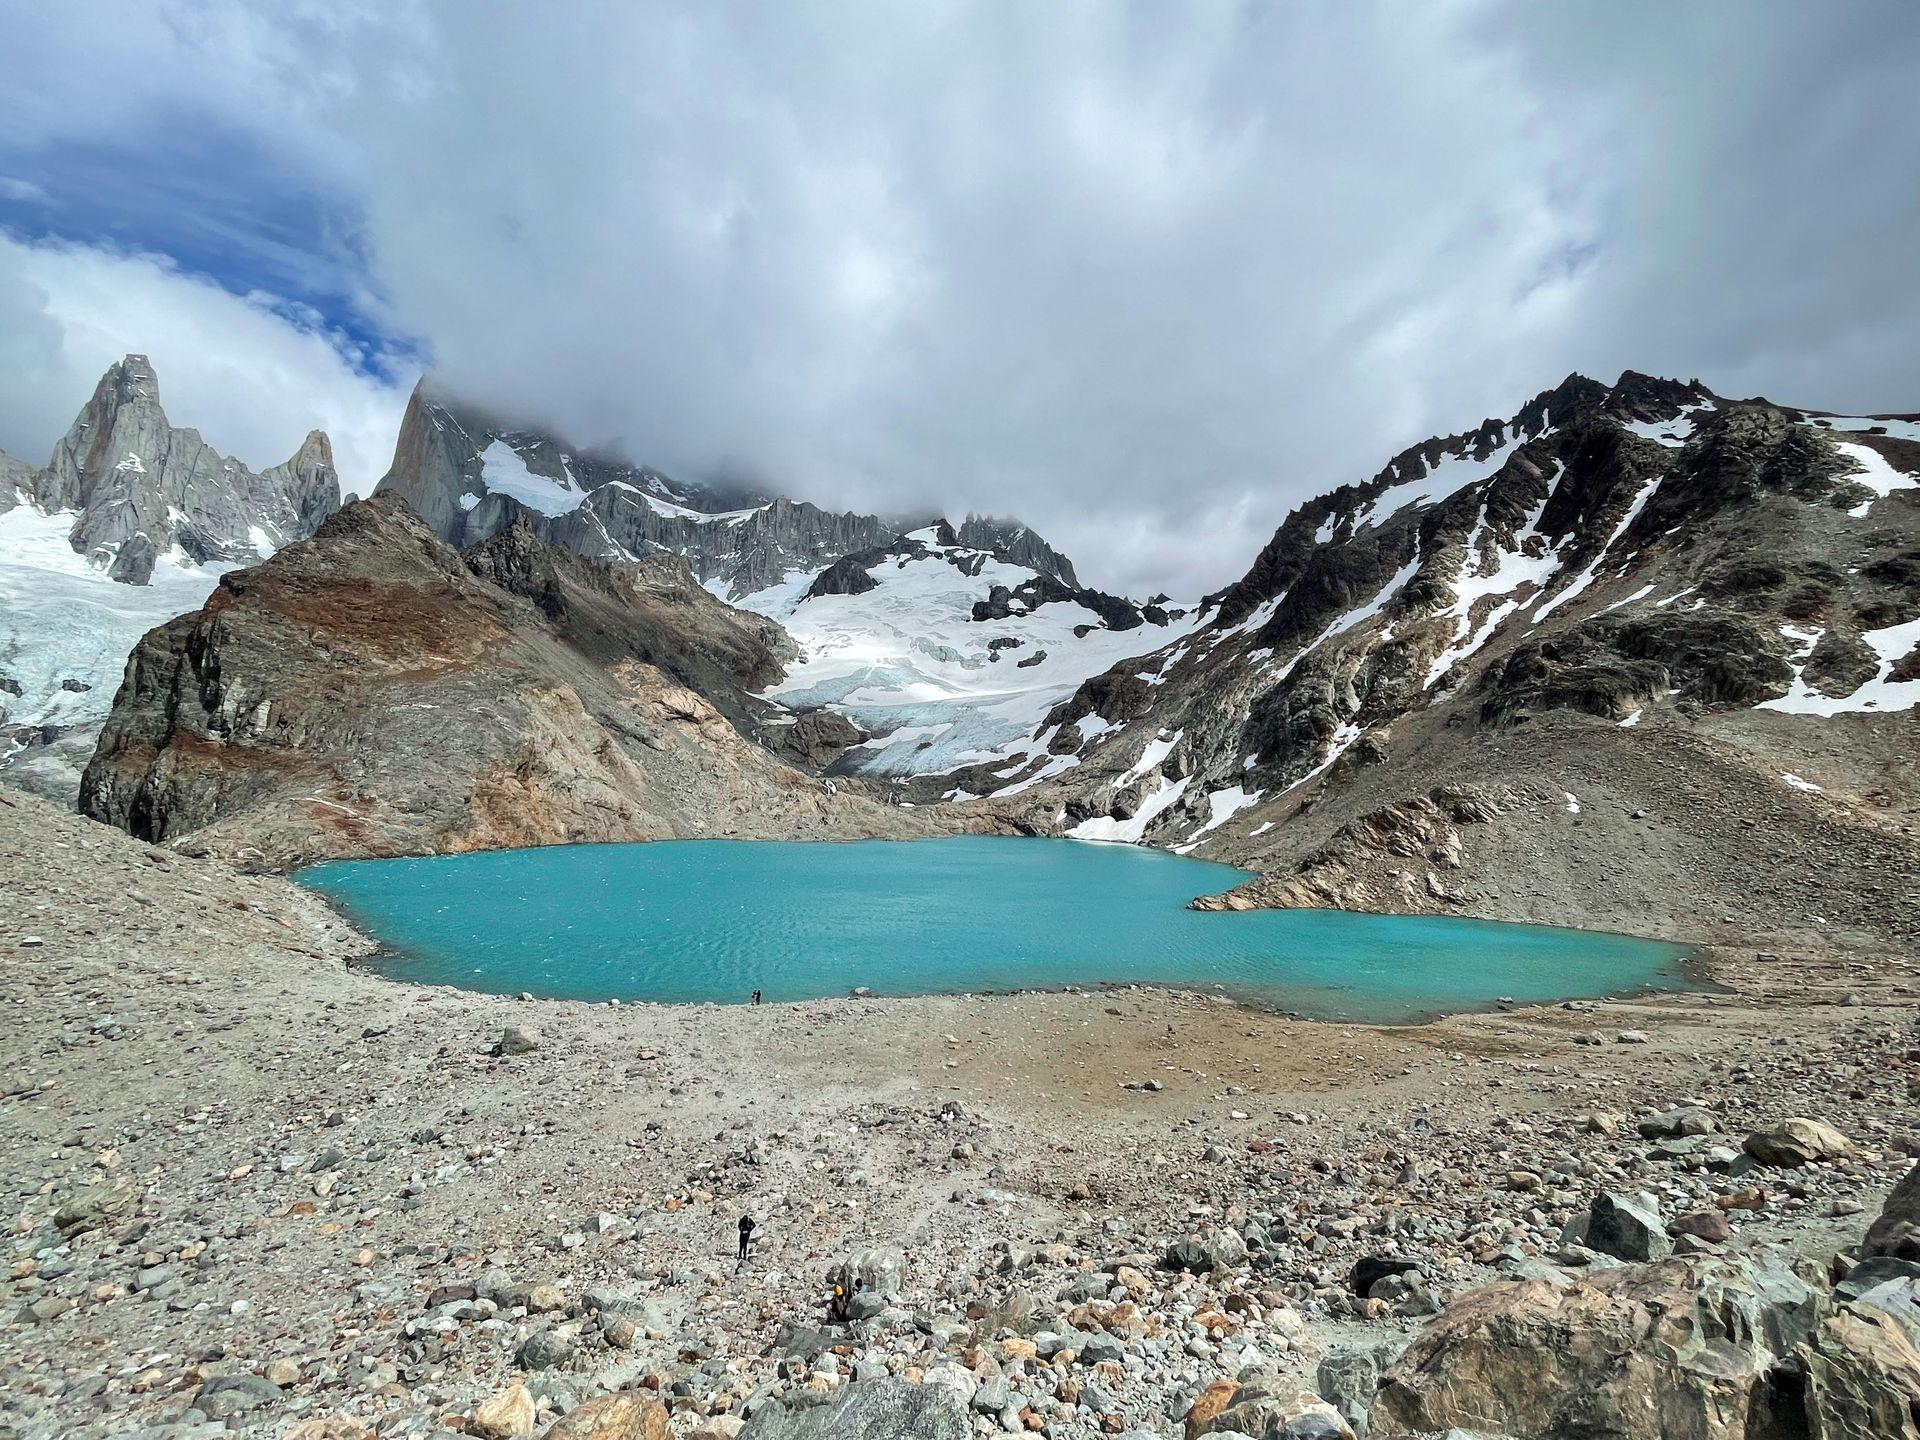 A small, bright blue lake with mountains in the background. The top of the mountains are obscured by clouds. There are multiple glaciers hanging on the mountains.